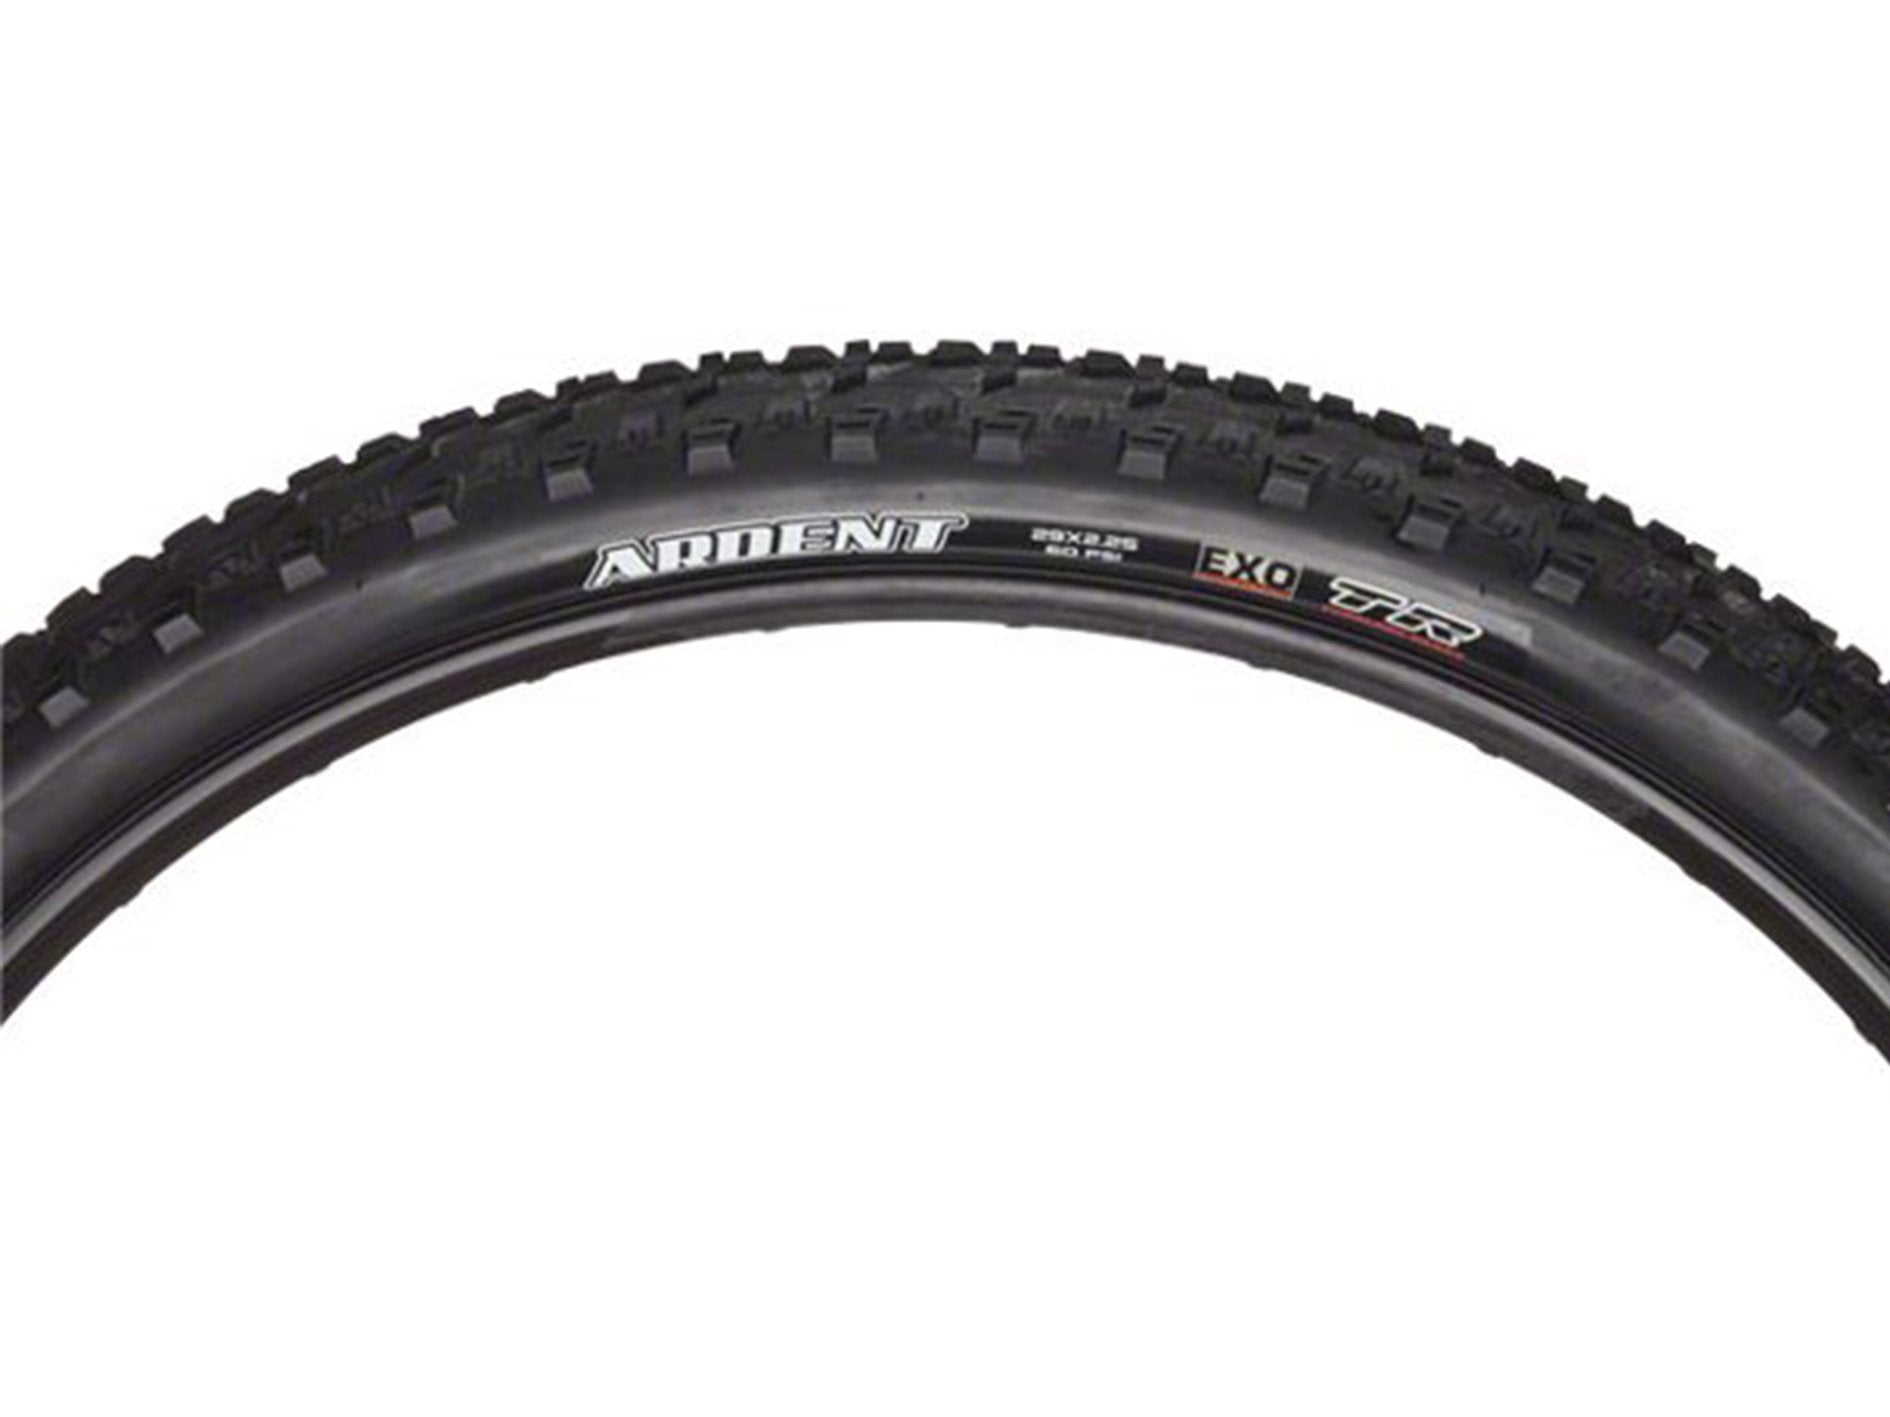 NEW Maxxis Ardent 27.5 x 2.25 Tire, Folding, 60tpi, Dual Compound, EXO